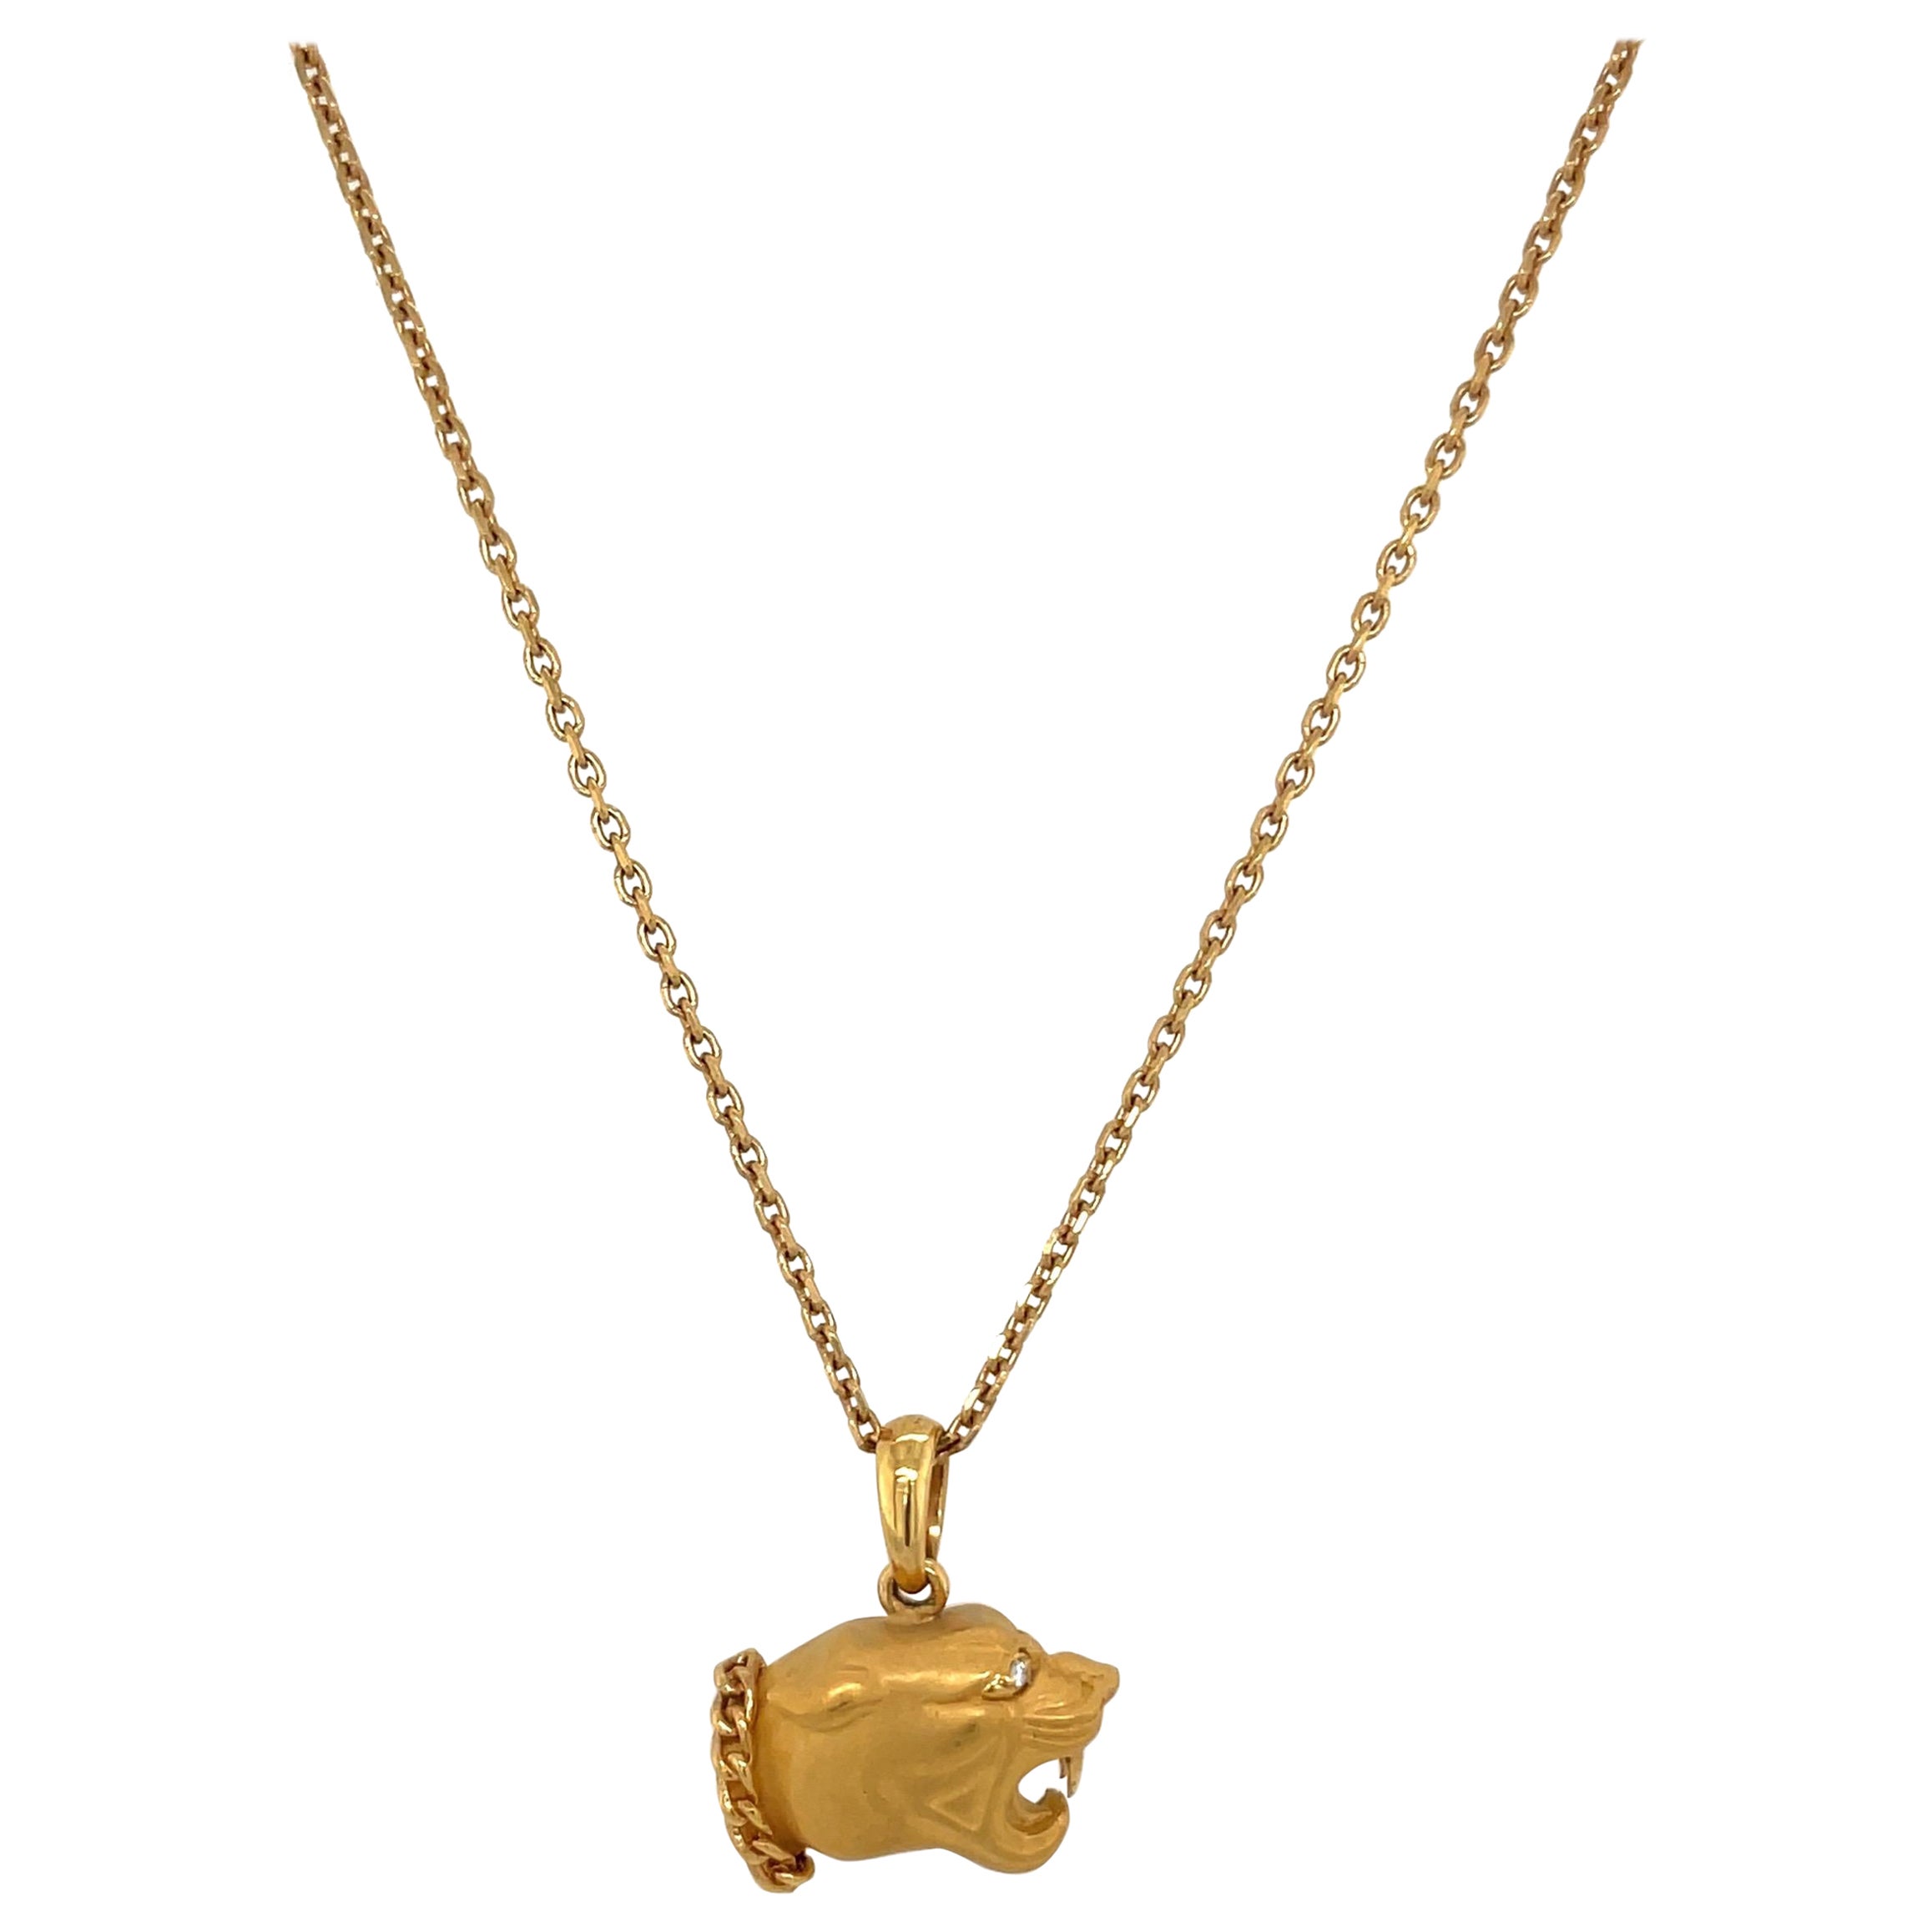 Carrera Y Carrera 18KT Yellow Gold Panther Necklace